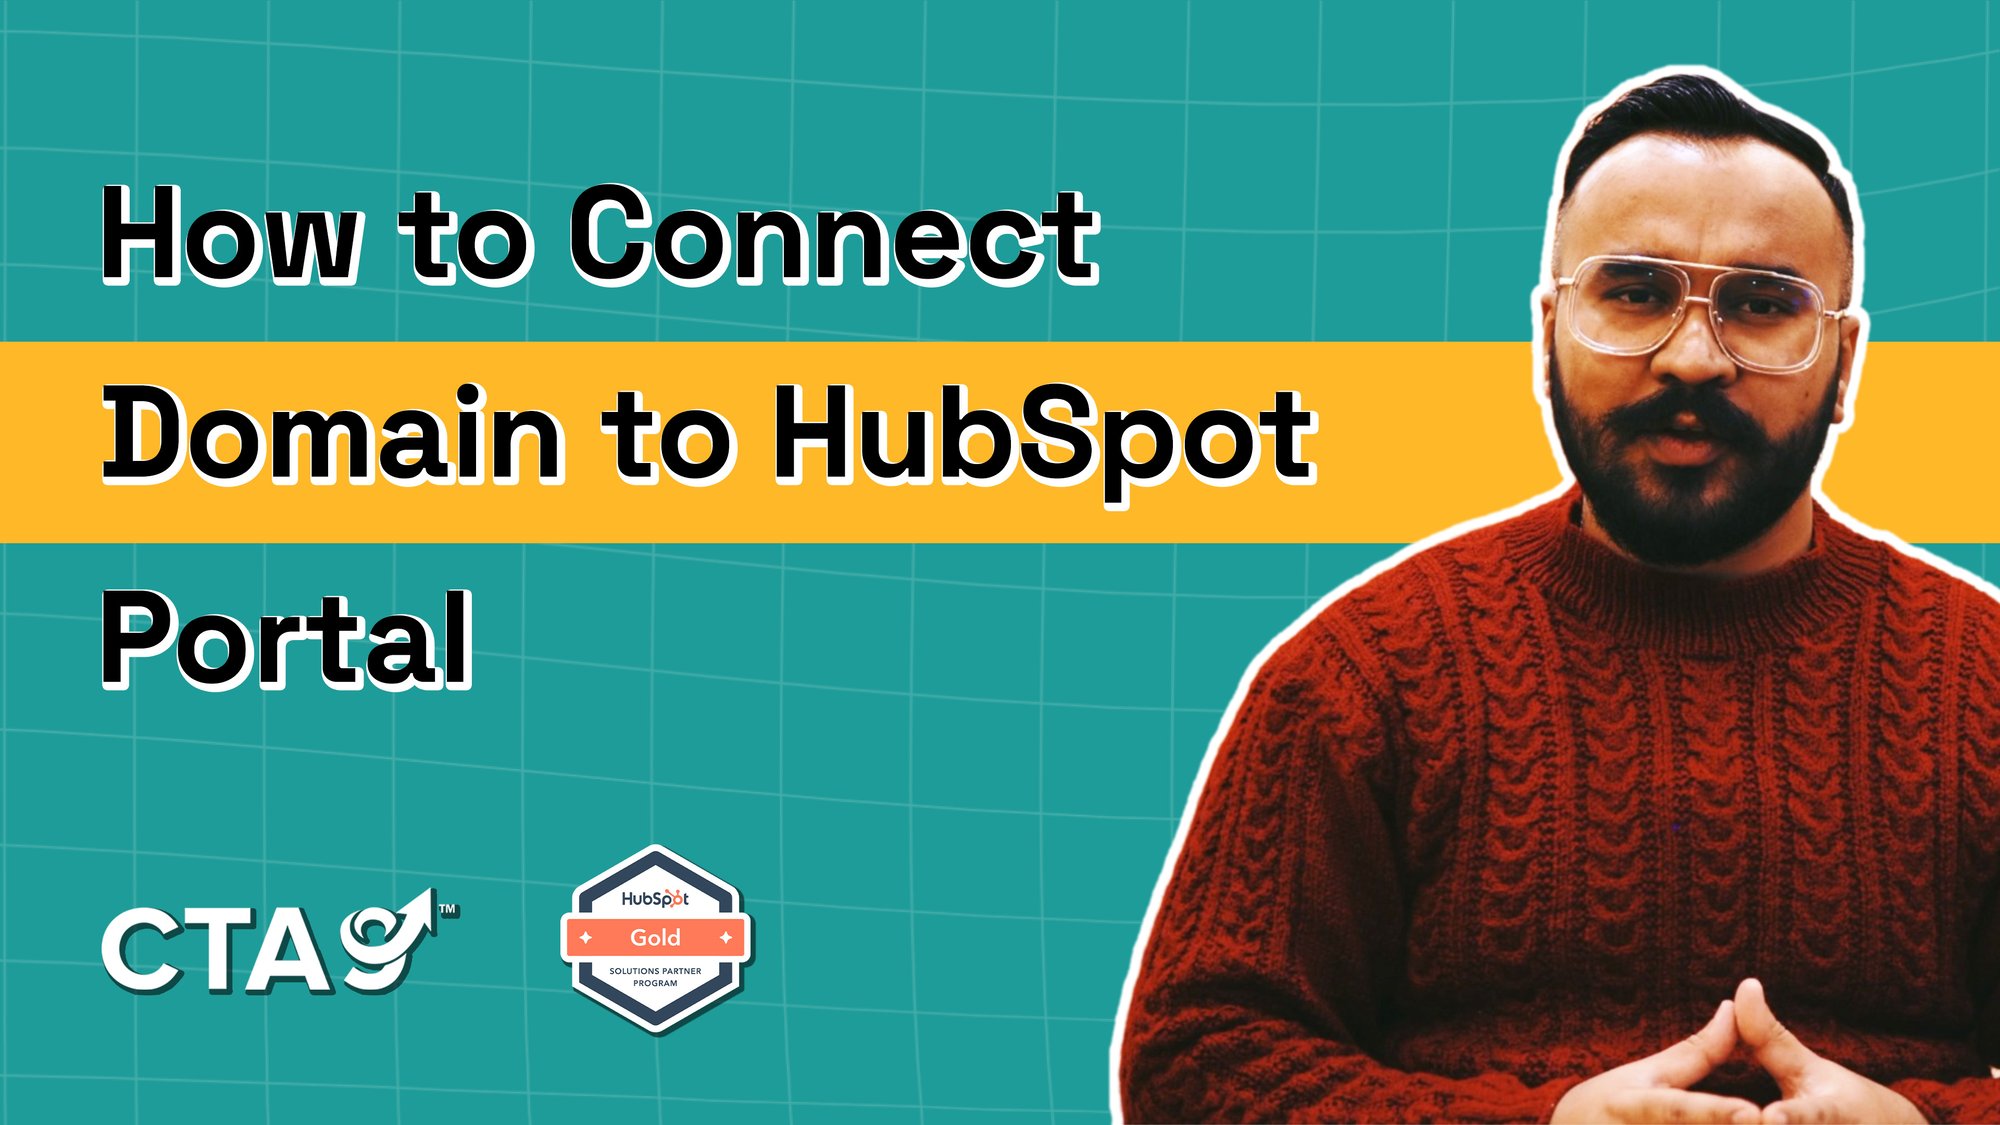 How to Connect Domain to HubSpot Portal